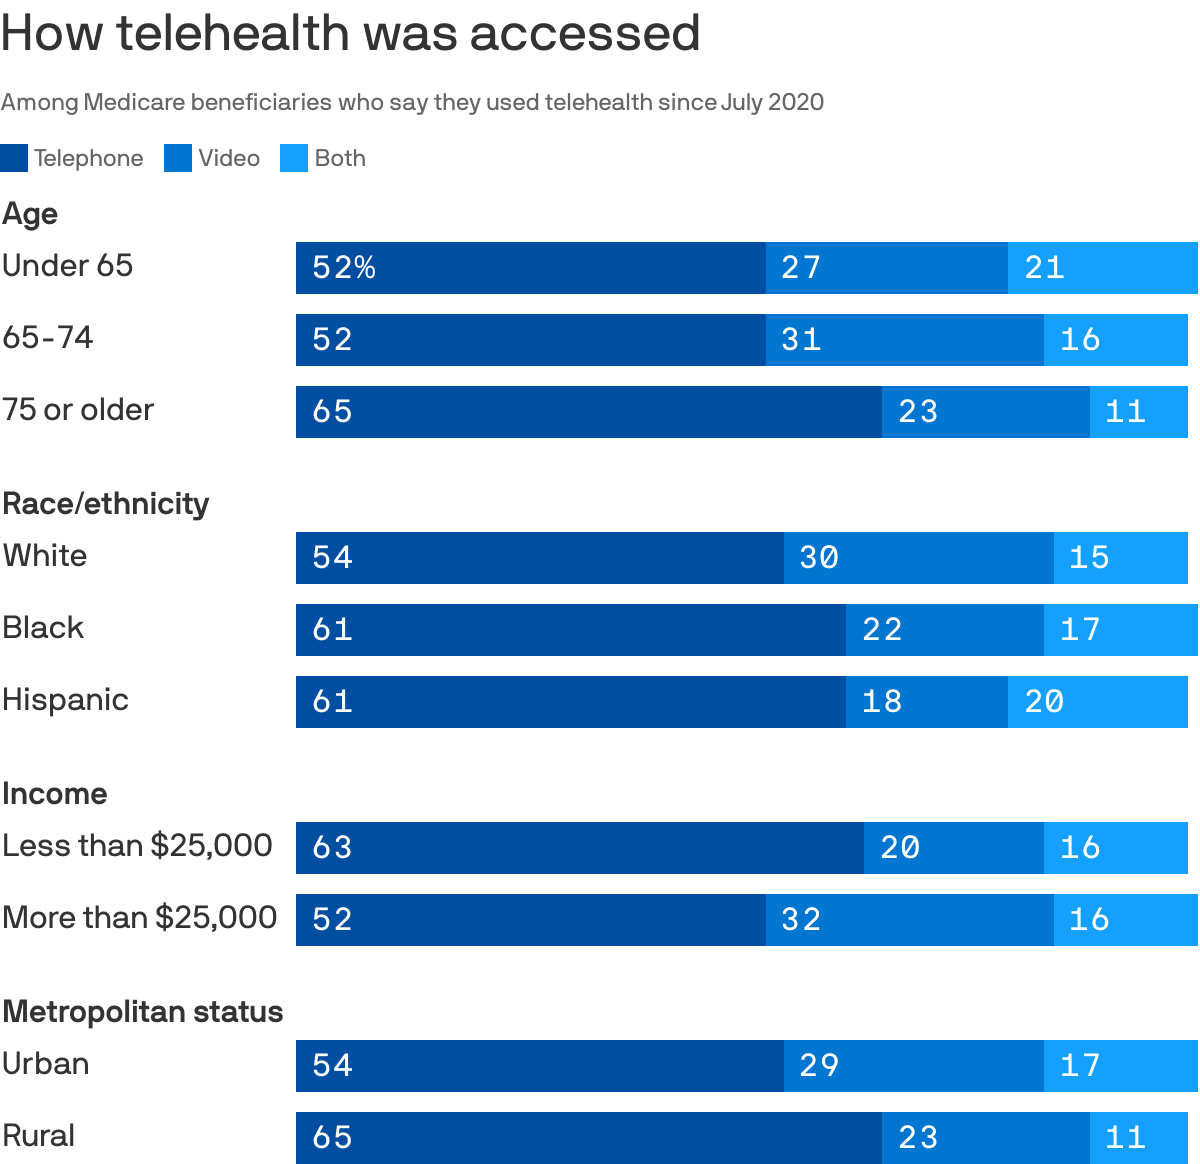 How telehealth was accessed